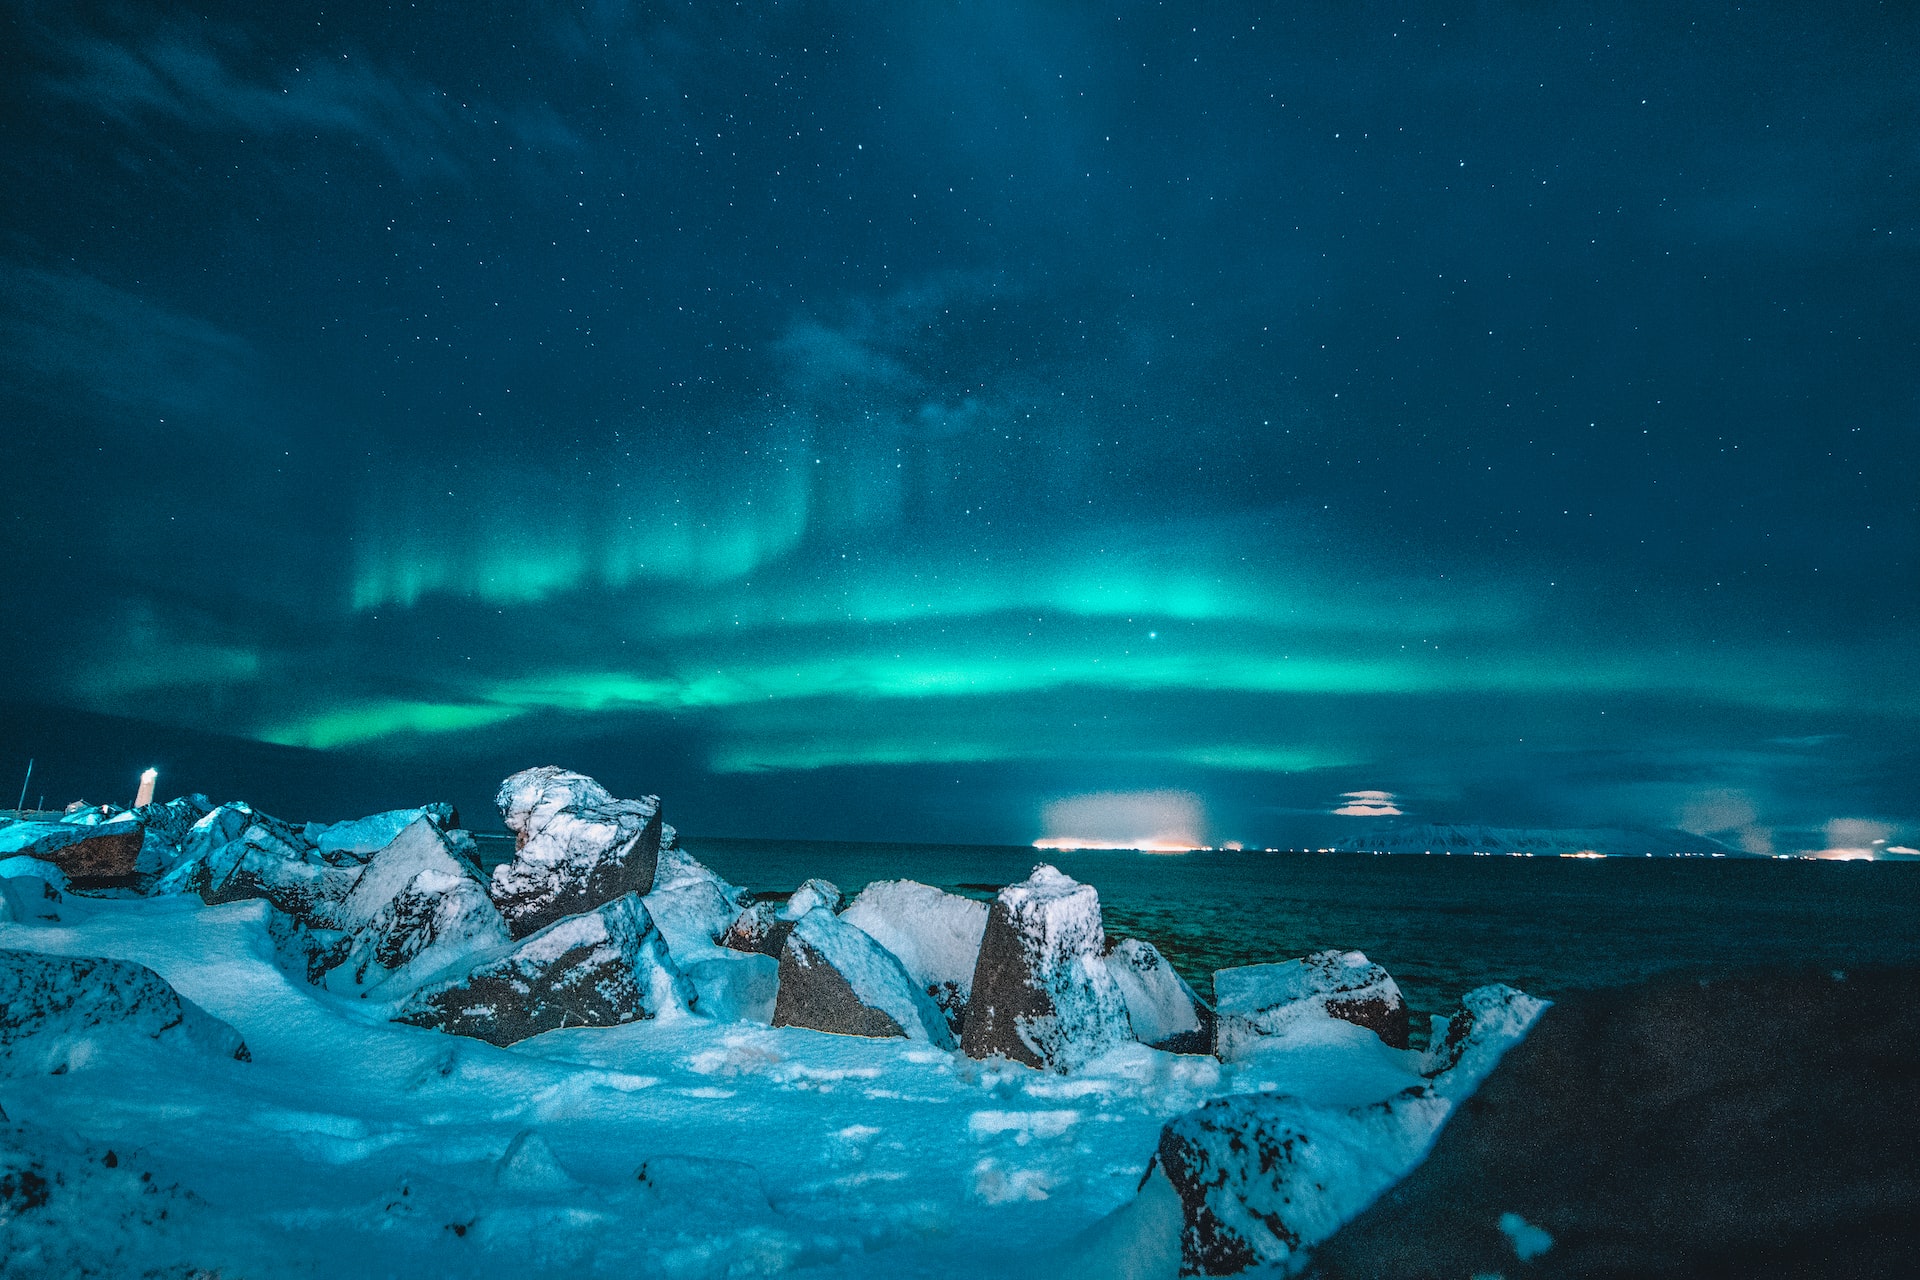 The northern lights over a wintry scene in Iceland.